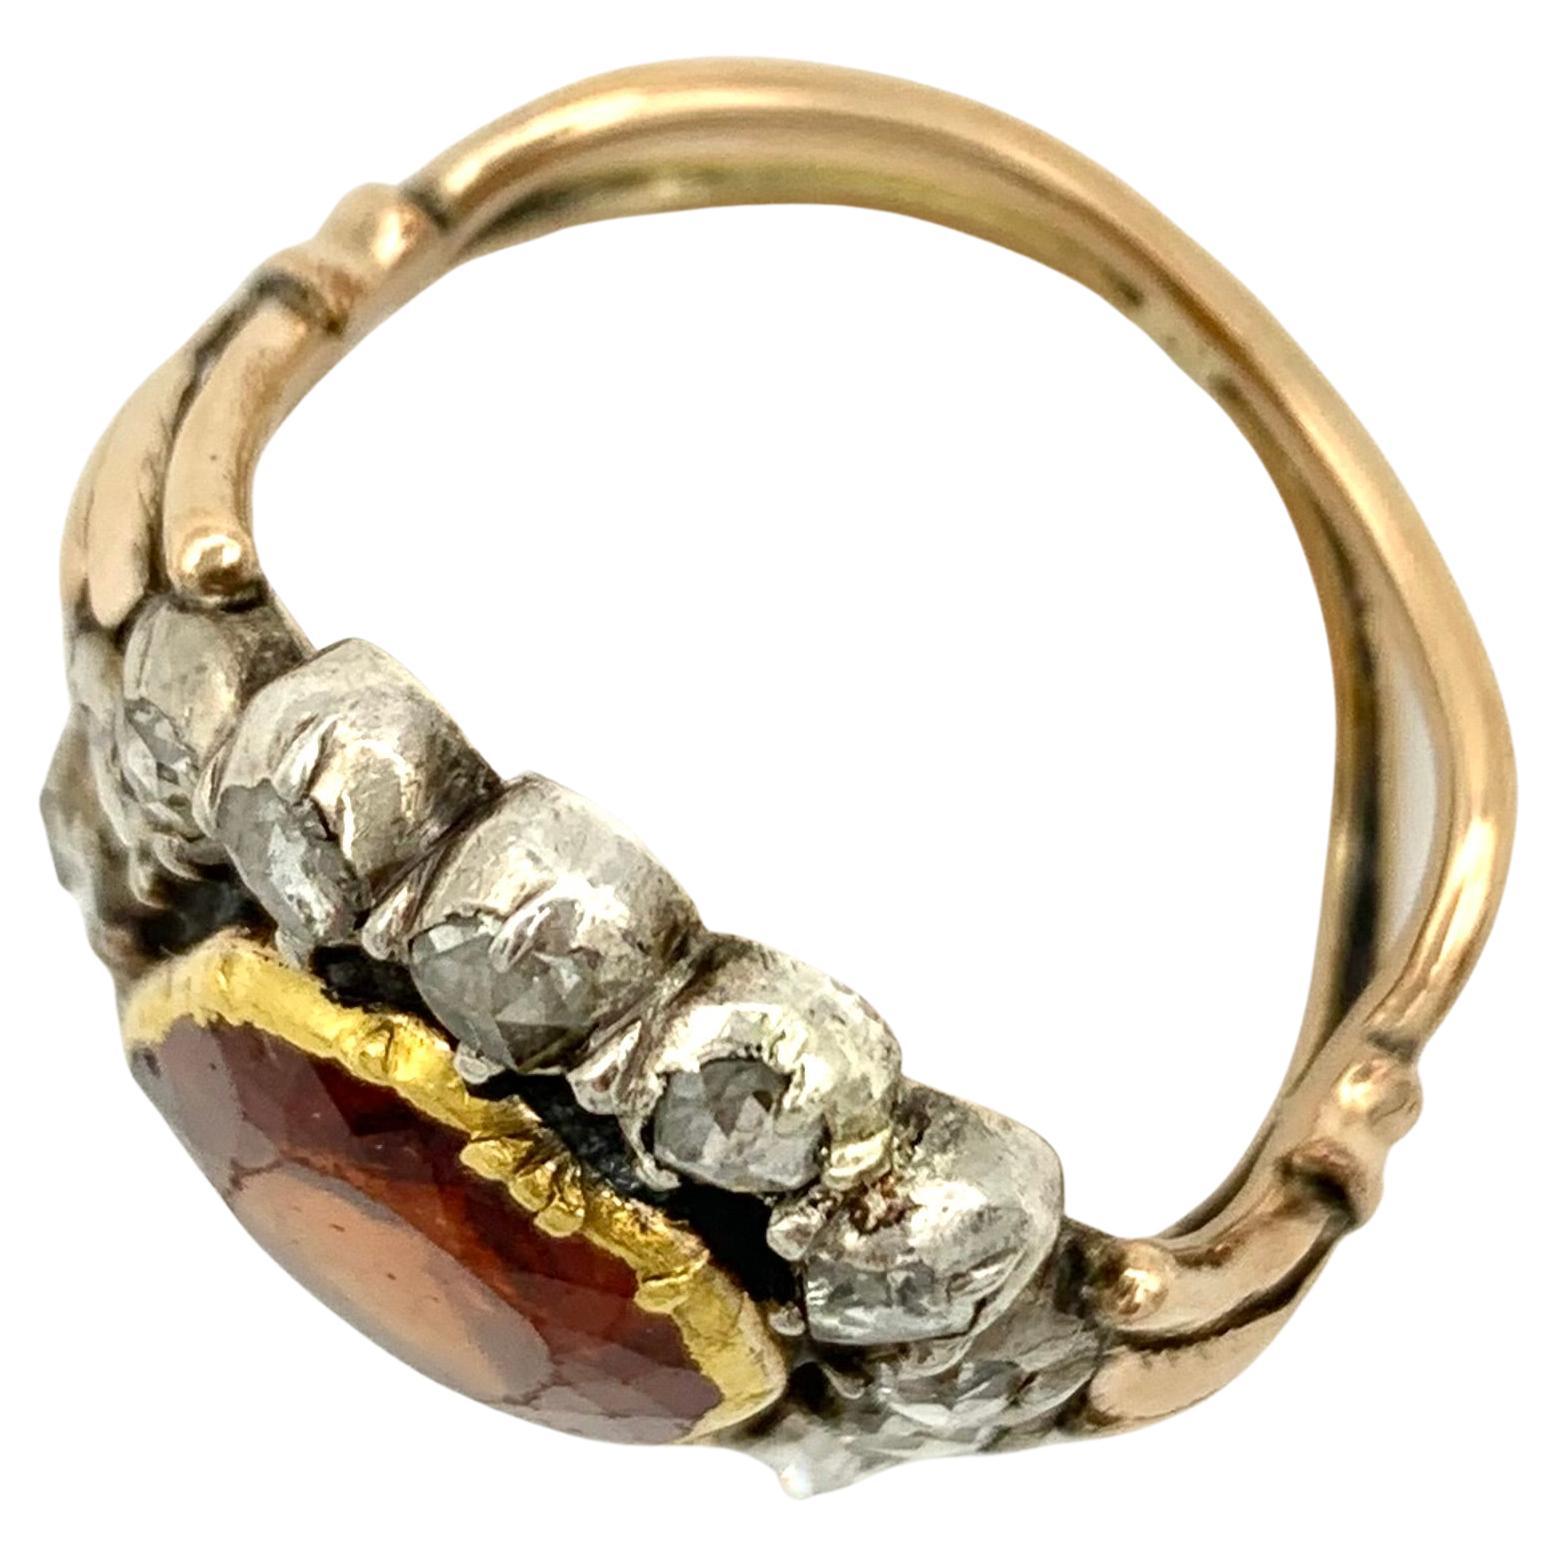 This large 18th century dress ring is set with a hessonite garnet mounted in gold and surrounded by fourteen rose diamonds set in silver. The back of the ring has been cut open in the course of history, most probably to remove dirt accumulated over